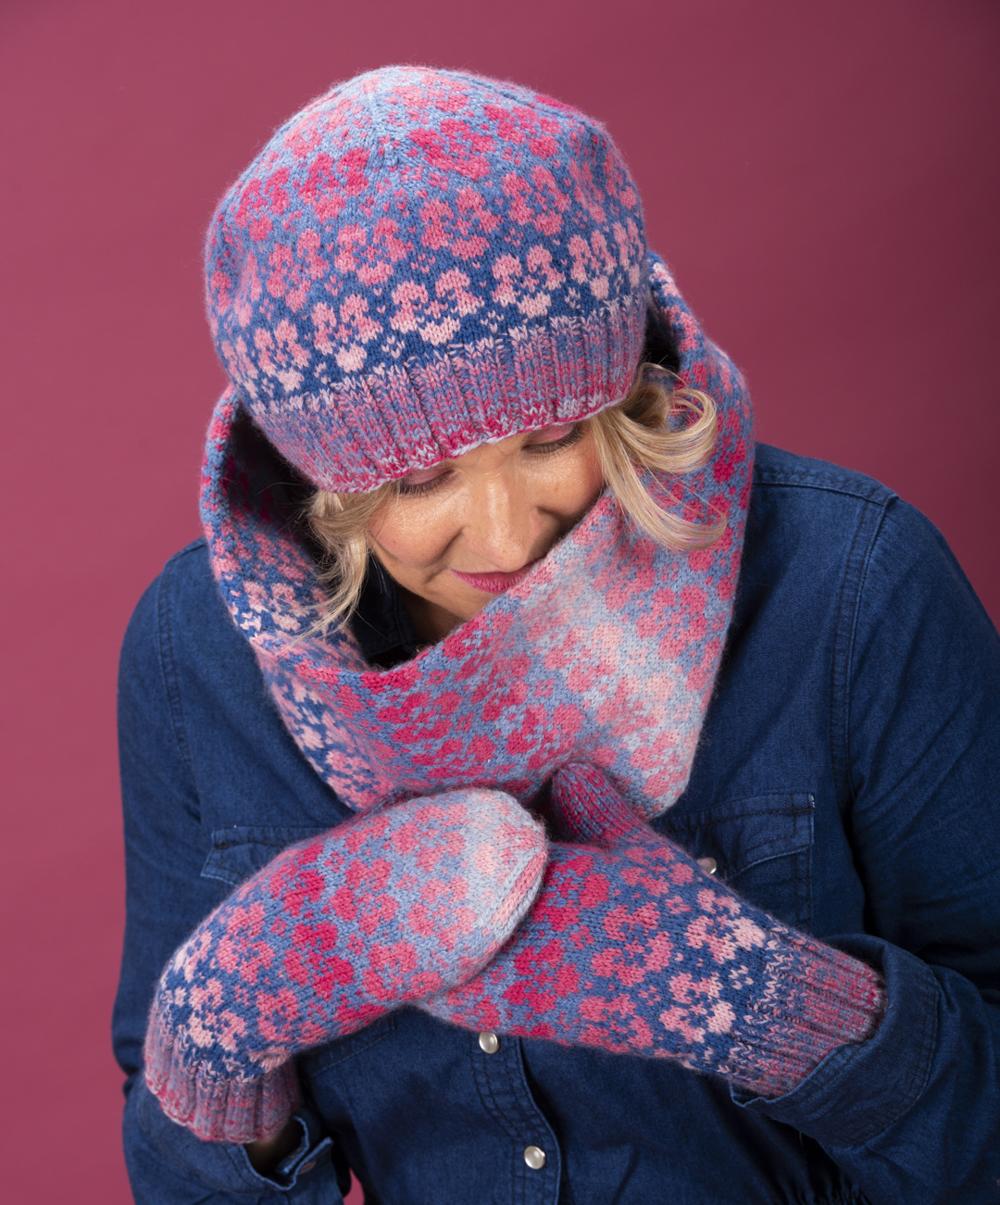 Heidi wears the full Flombre set - matching hat, cowl and mittens each worked in gradients of pink flowers against blue grounds; the background in the image is pink and Heidi wears a deep blue denim dress with the hand knitted Flombre accessories